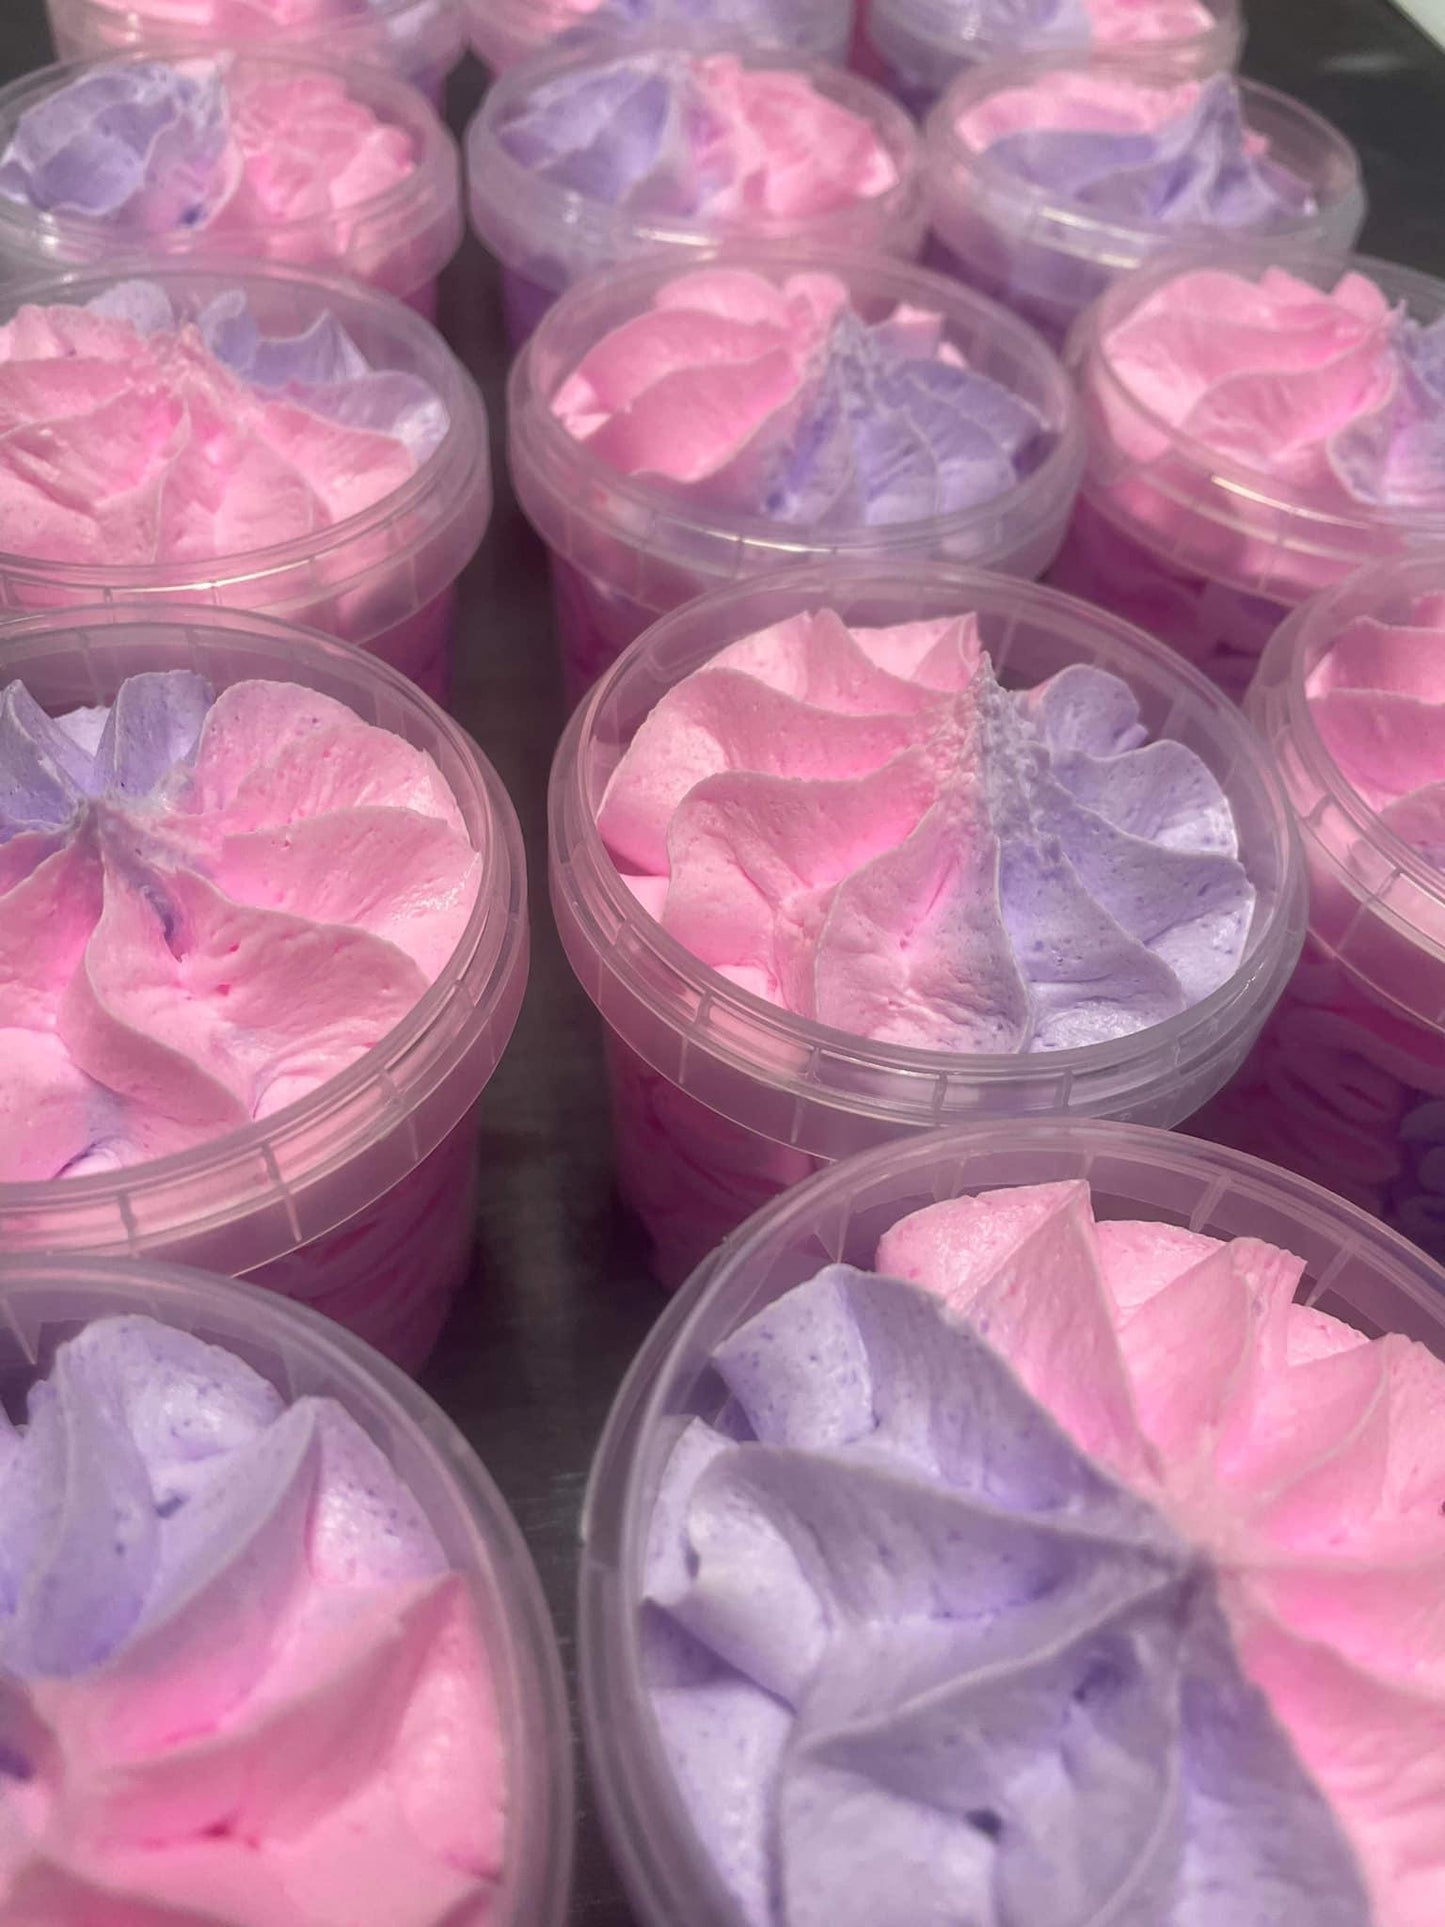 Women's Perfume Inspired Whipped Soap - The Soap Gal x